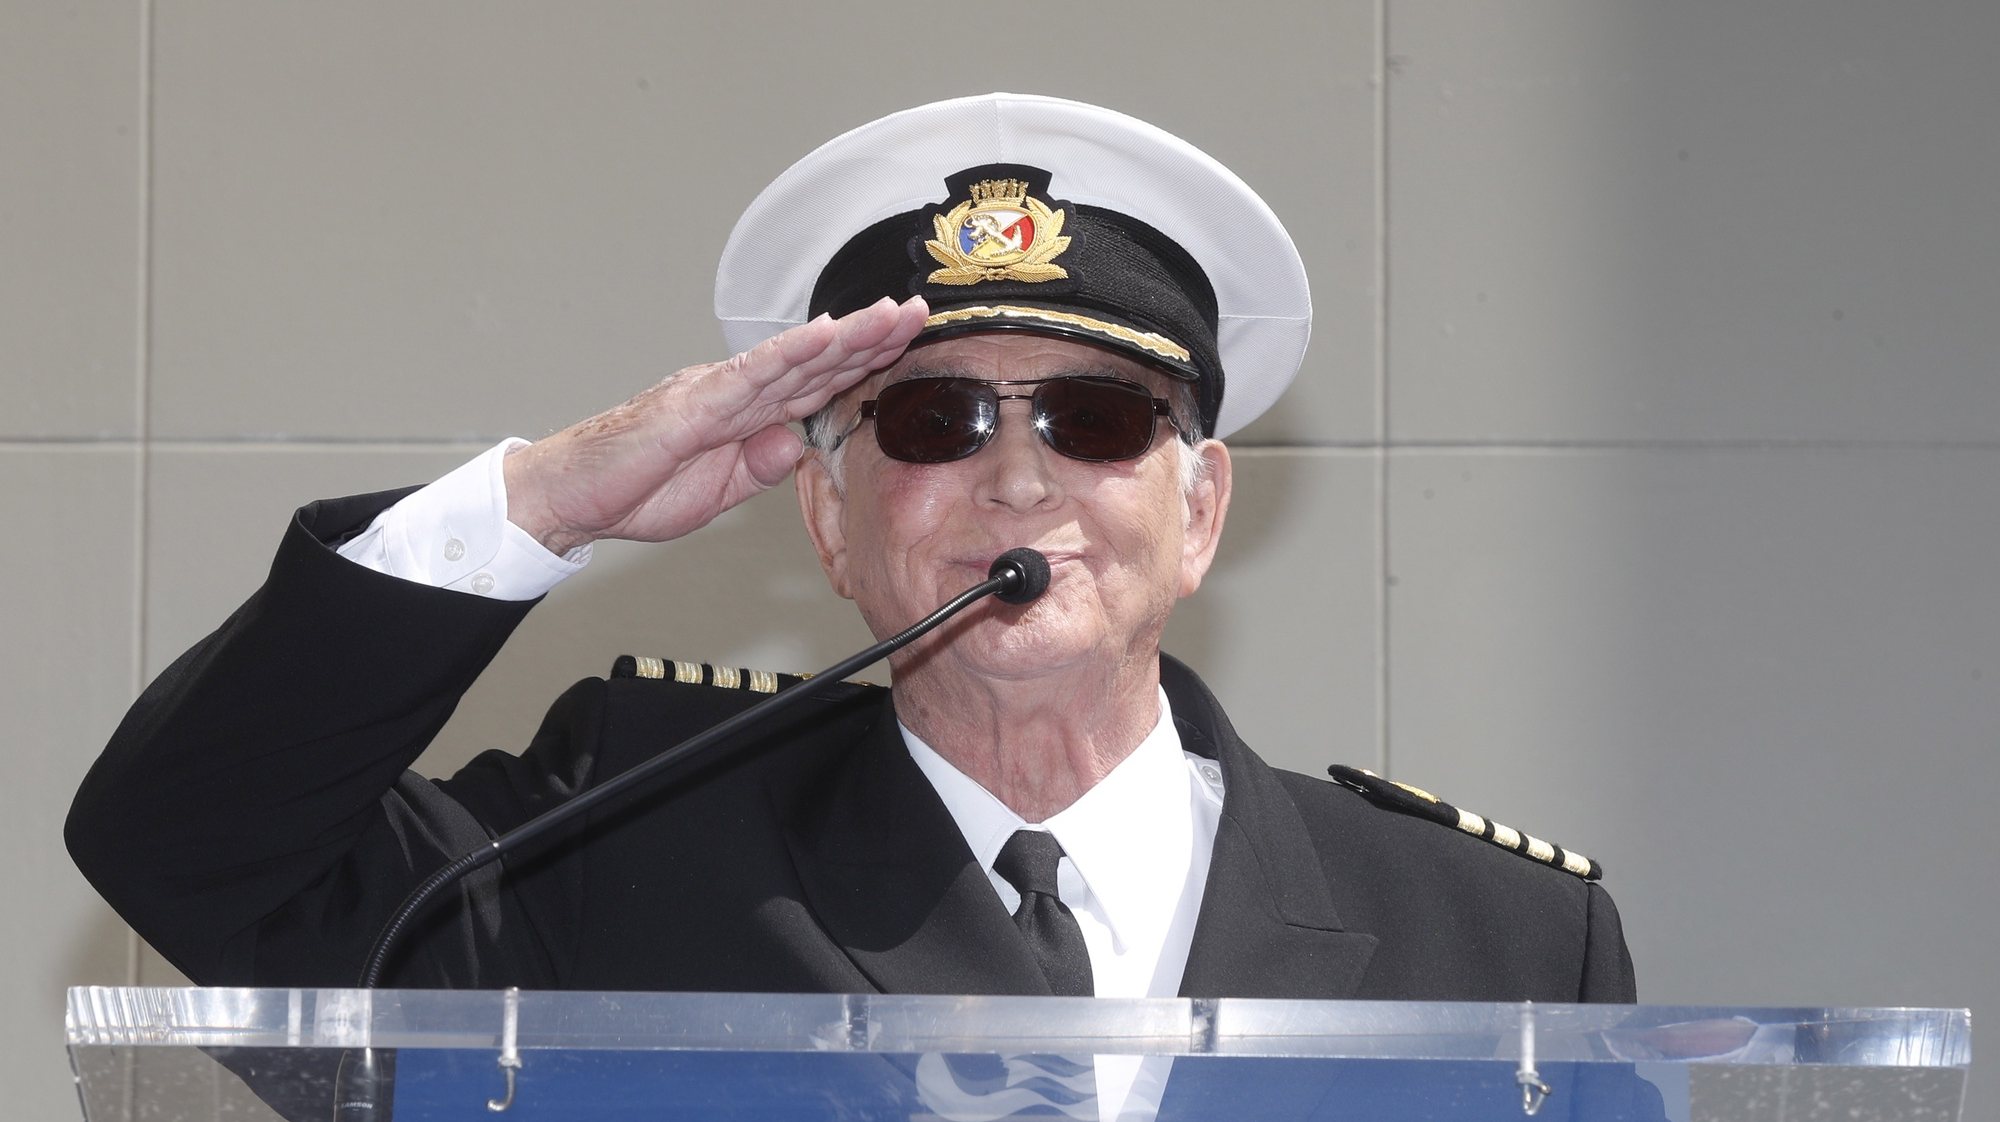 epa06726457 Gavin MacLeod (C) who played &#039;Captain Merrill Stubing&#039; salutes during the star dedication ceremony for the popular television series &#039;Love Boat&#039; by the Friends of the Hollywood Walk of Fame on the Hollywood Boulevard, in Hollywood, California, USA, 10 May 2018.  EPA/MIKE NELSON